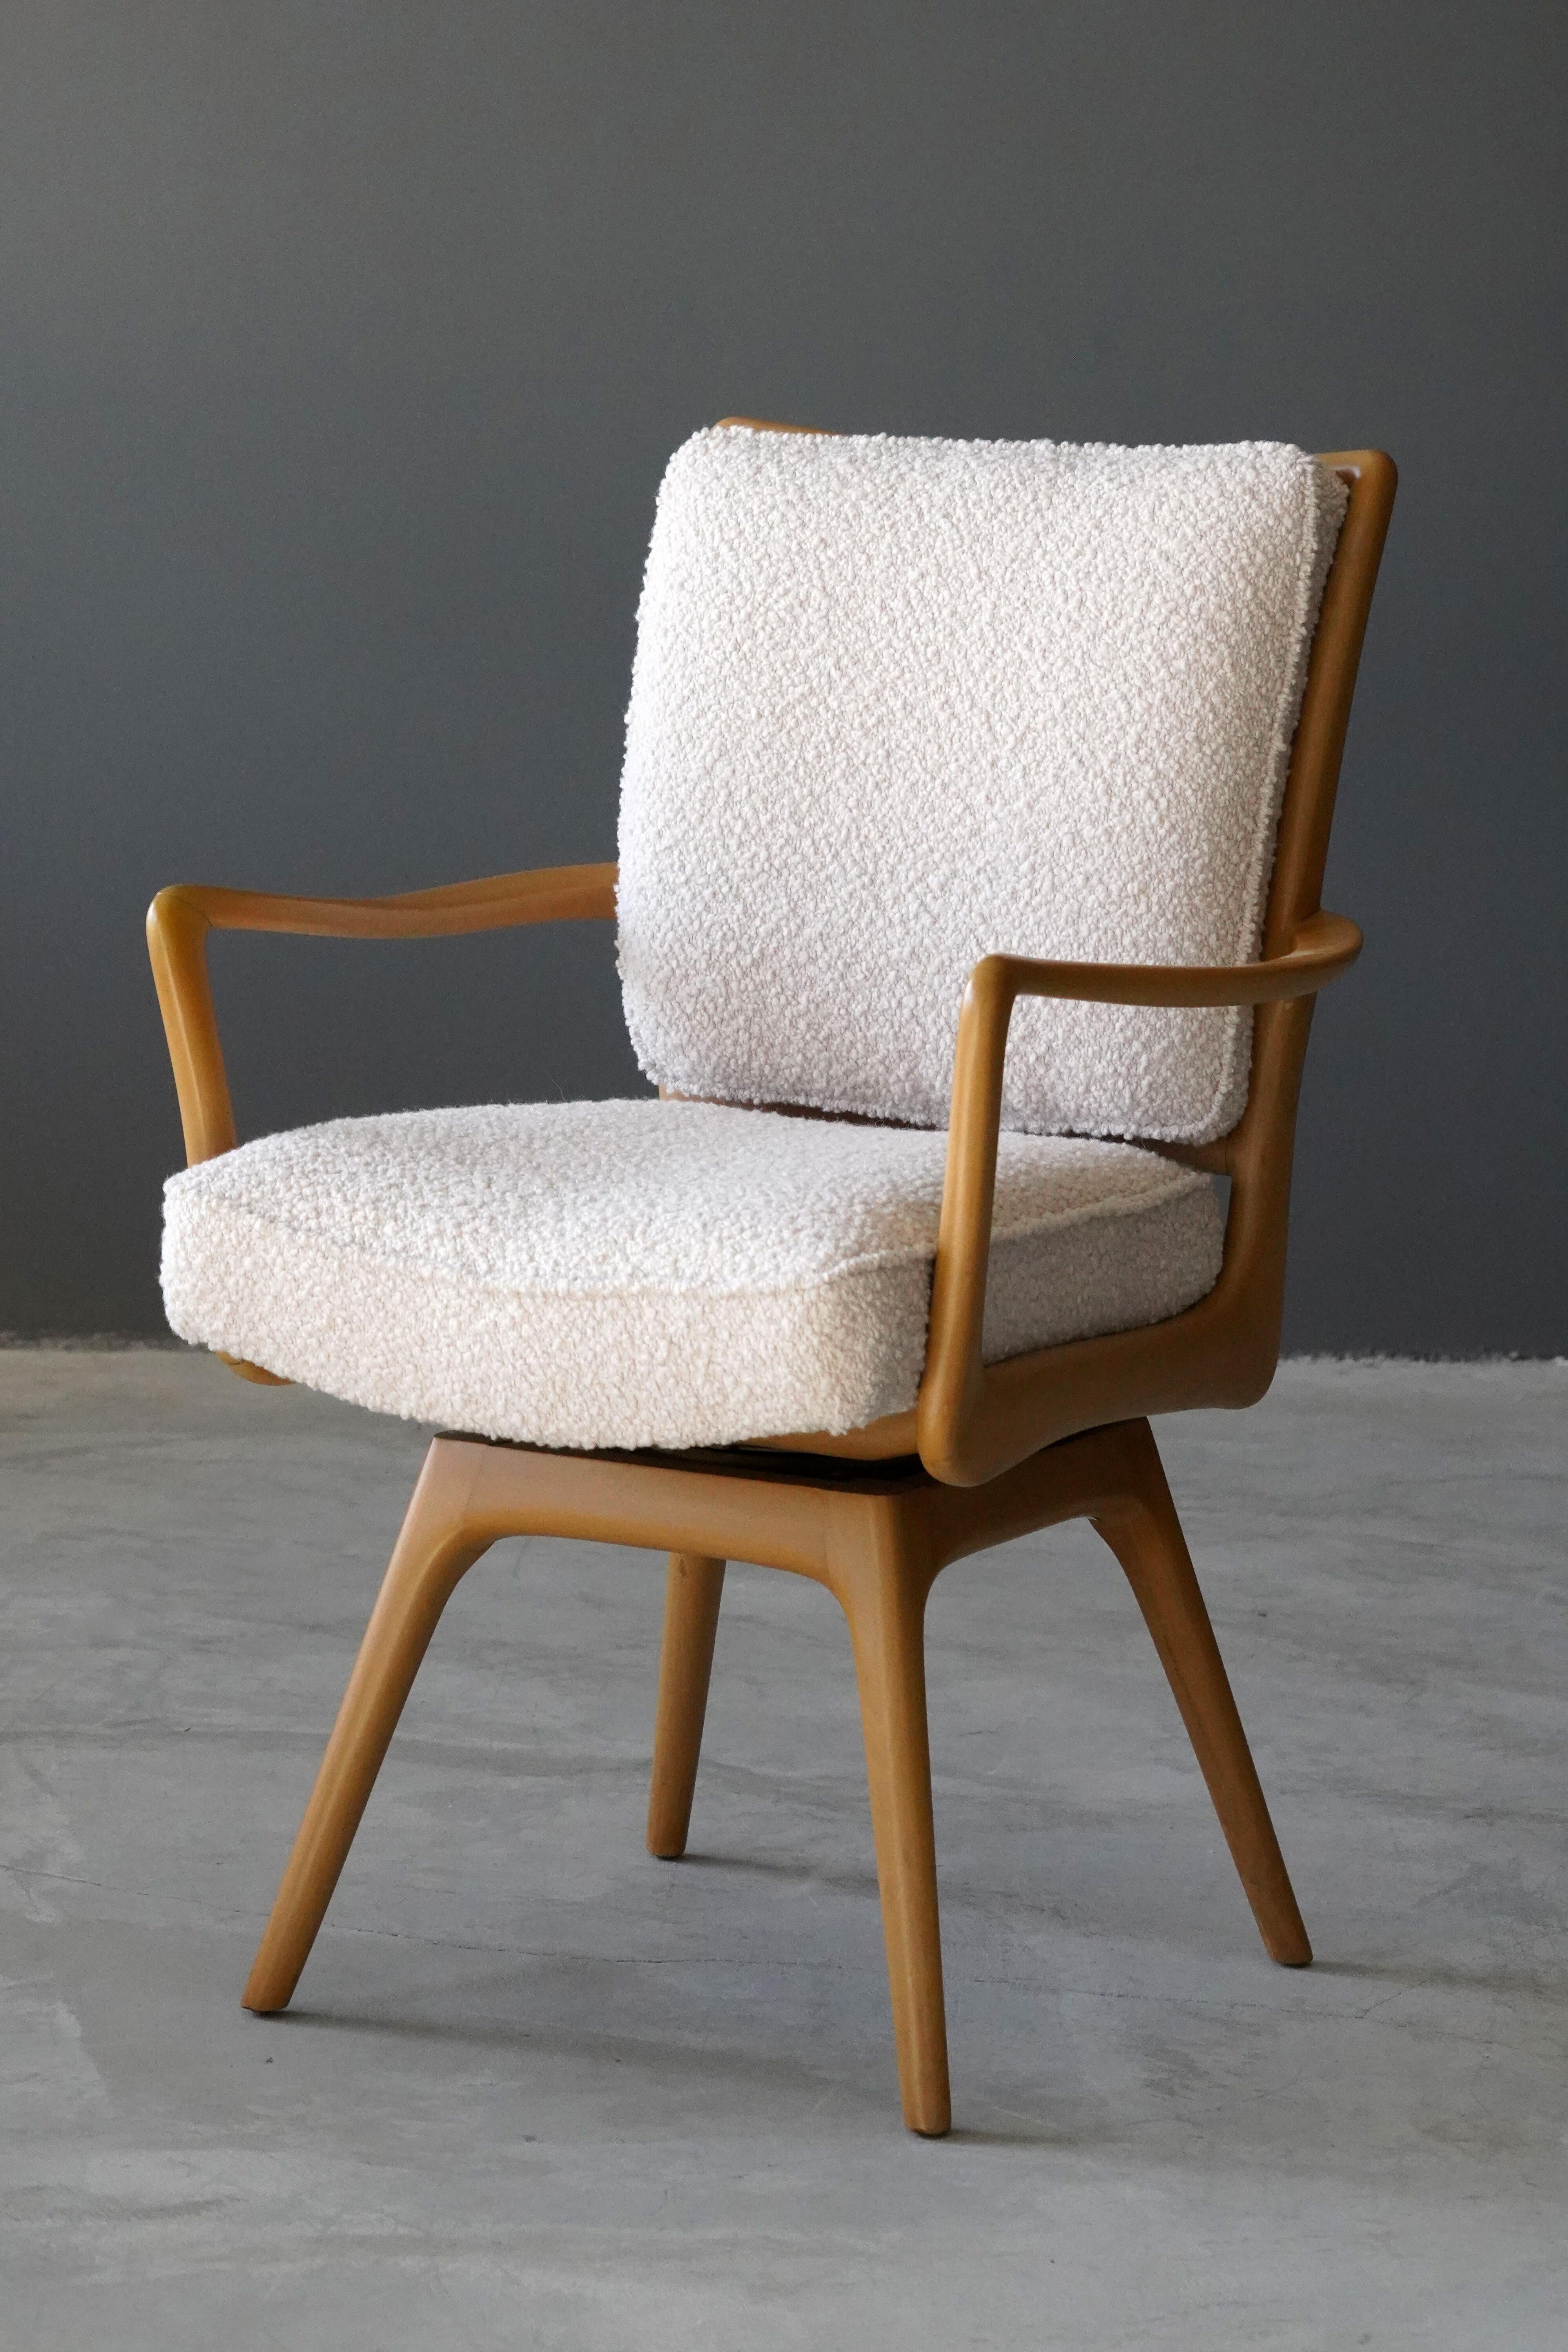 A swiveling organic armchair / desk chair designed by Vladimir Kagan. Organically carved wood is paired with a high-end bouclé fabric. Produced by Kagan-Dreyfus, 1960s. With metal plaque. 

Other designers of the period include Paul Frankl, Gio